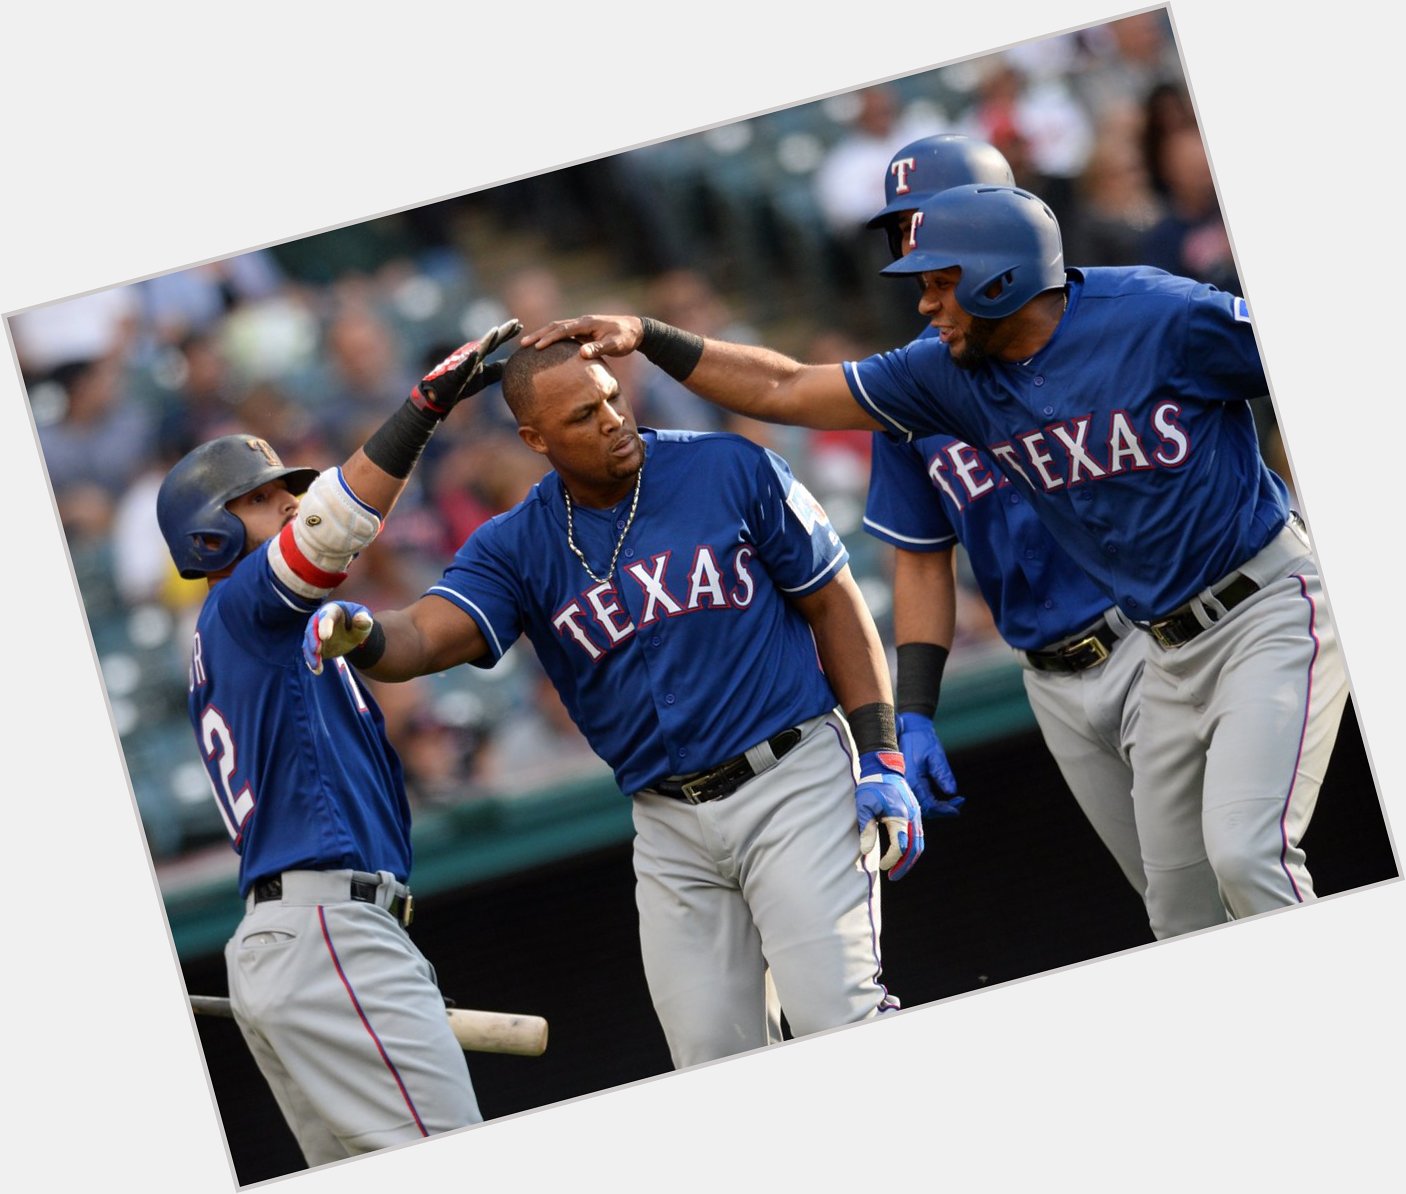 Happy Birthday to one of the great all-time 3B: Adrian Beltre  : 